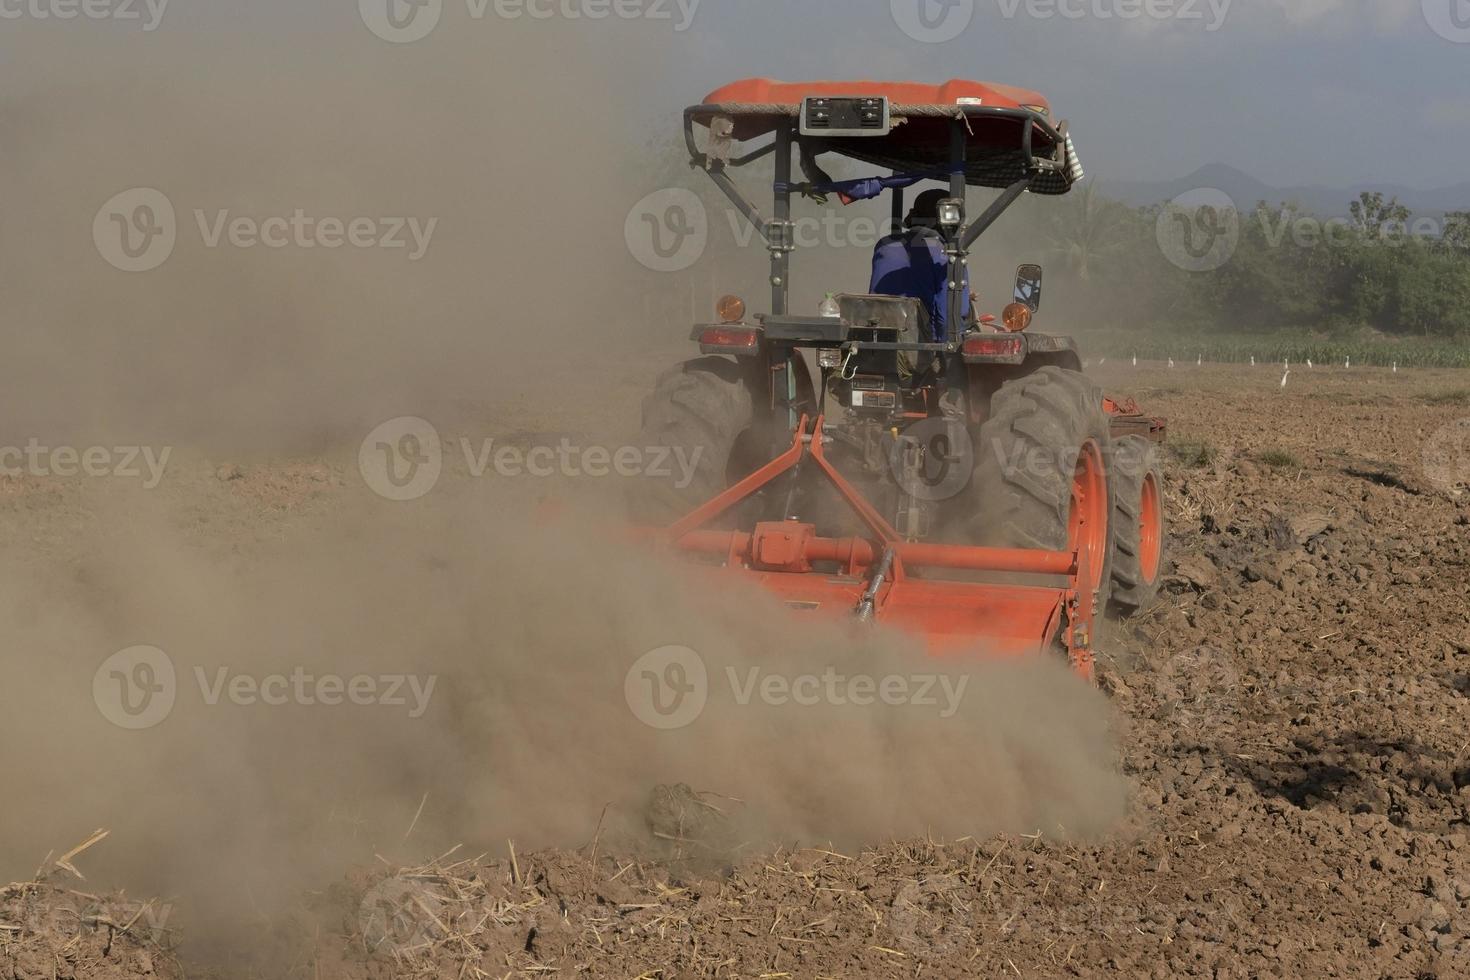 Farmers in tractors prepare land cultivators. tractors plowing the soil to adjust the soil for agriculture photo